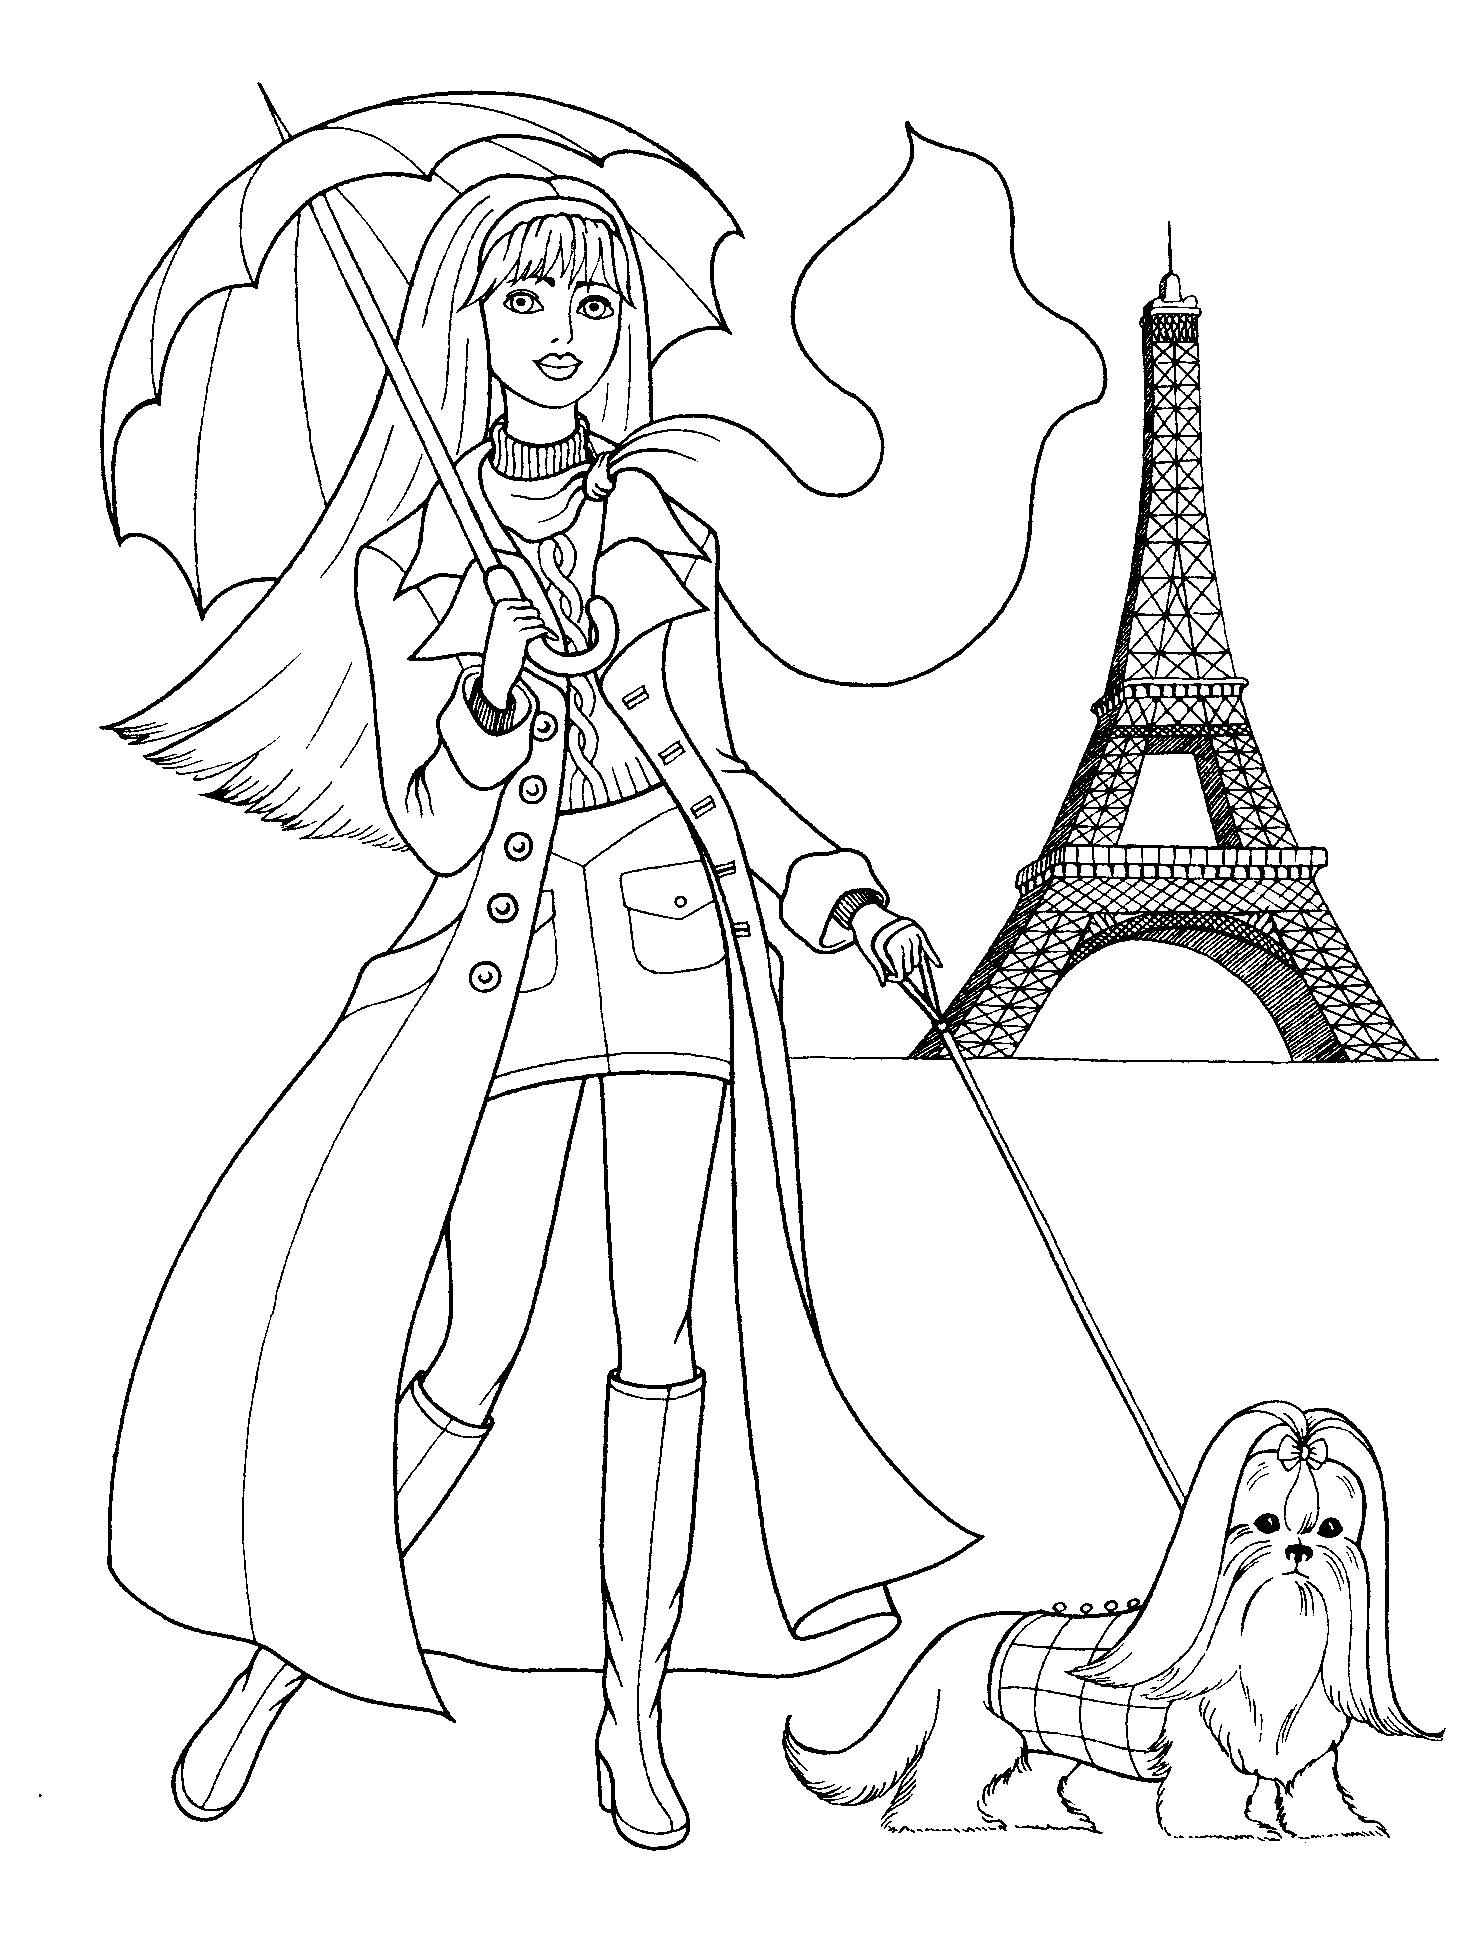 Coloring Pages For Girls Images
 Pin en Colorings